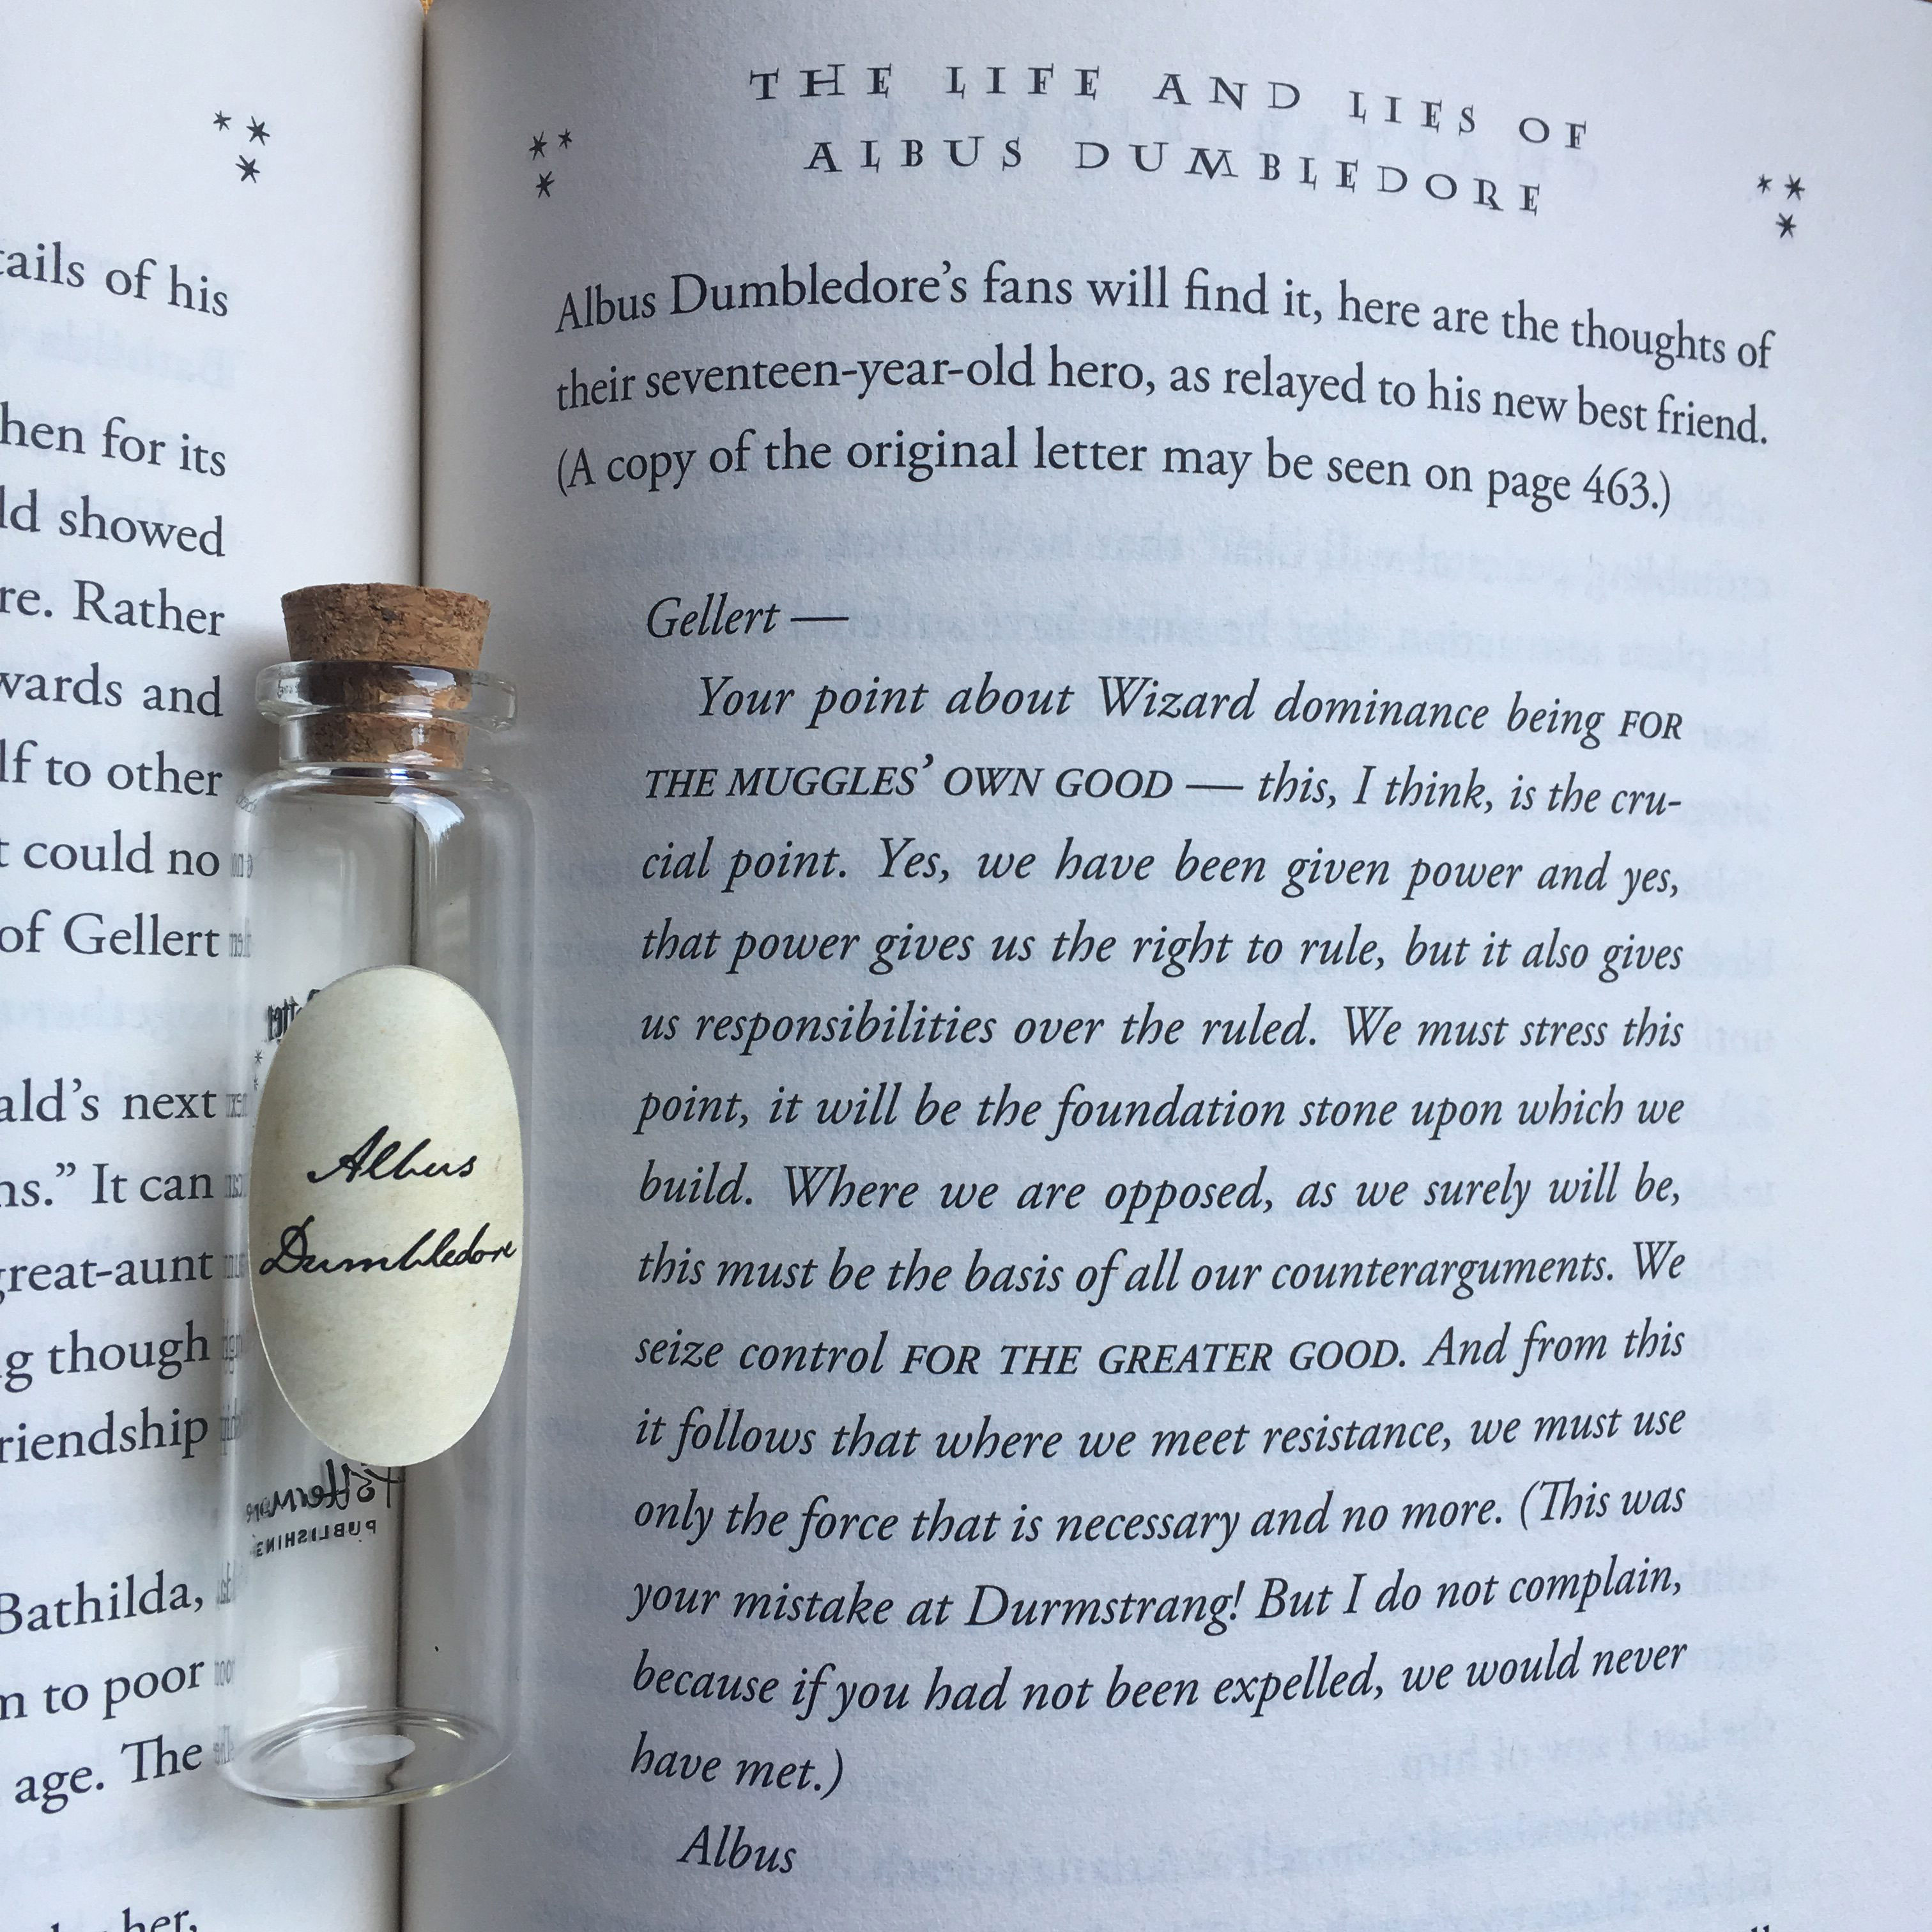 Albus Dumbledore’s Pensieve vial lying on top of the page containing young Dumbledore’s letter to young Grellert Grindelwald showing their belief in the “greater good,” from Chapter 18, “The Life and Lies of Albus Dumbledore,” from “Harry Potter and the Deathly Hallows”